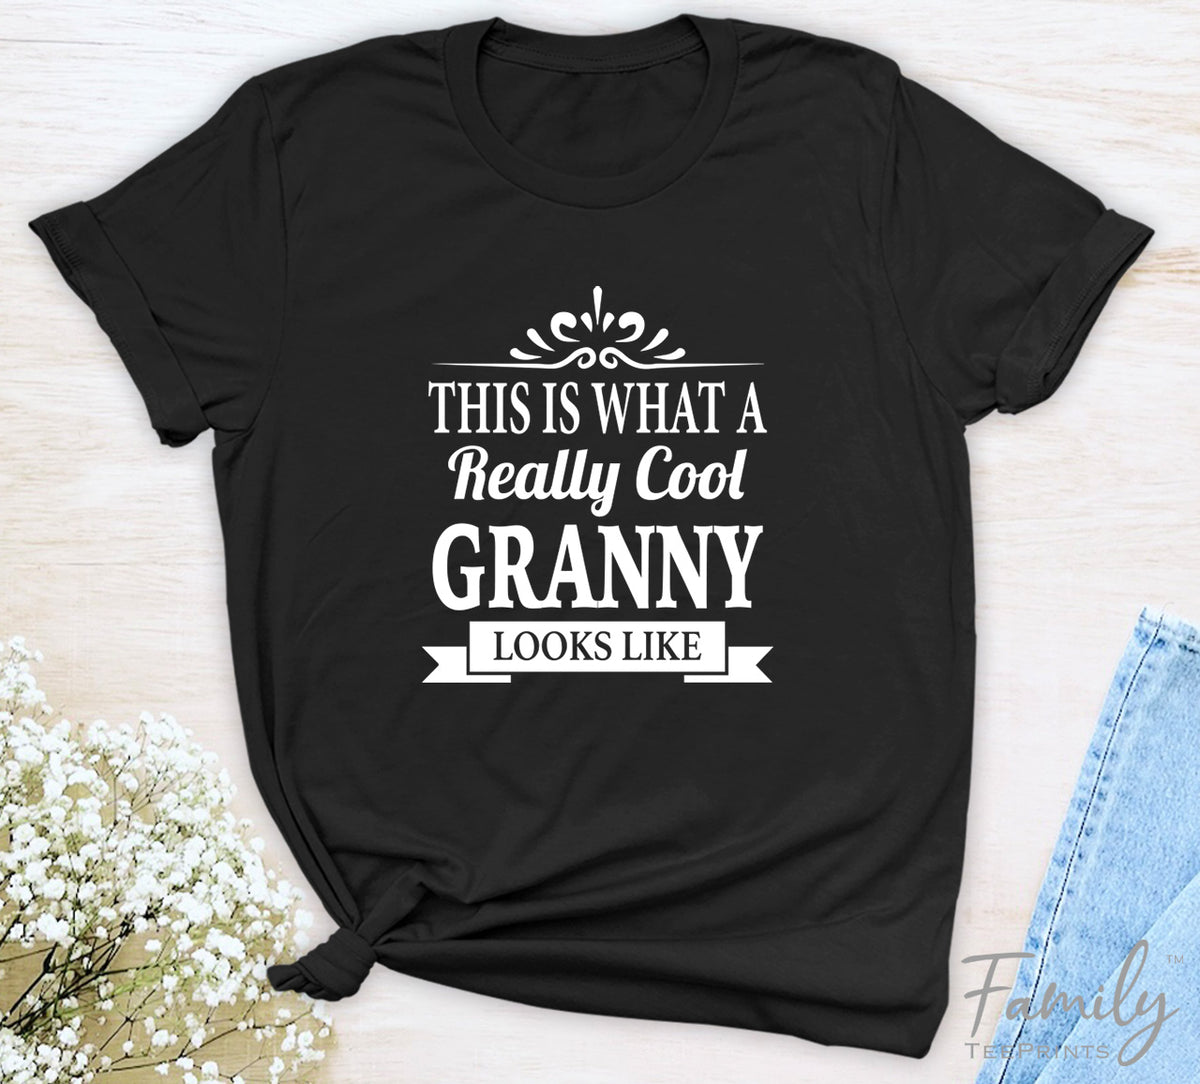 This Is What A Really Cool Granny Looks Like - Unisex T-shirt - Granny Shirt - Gift For Granny - familyteeprints